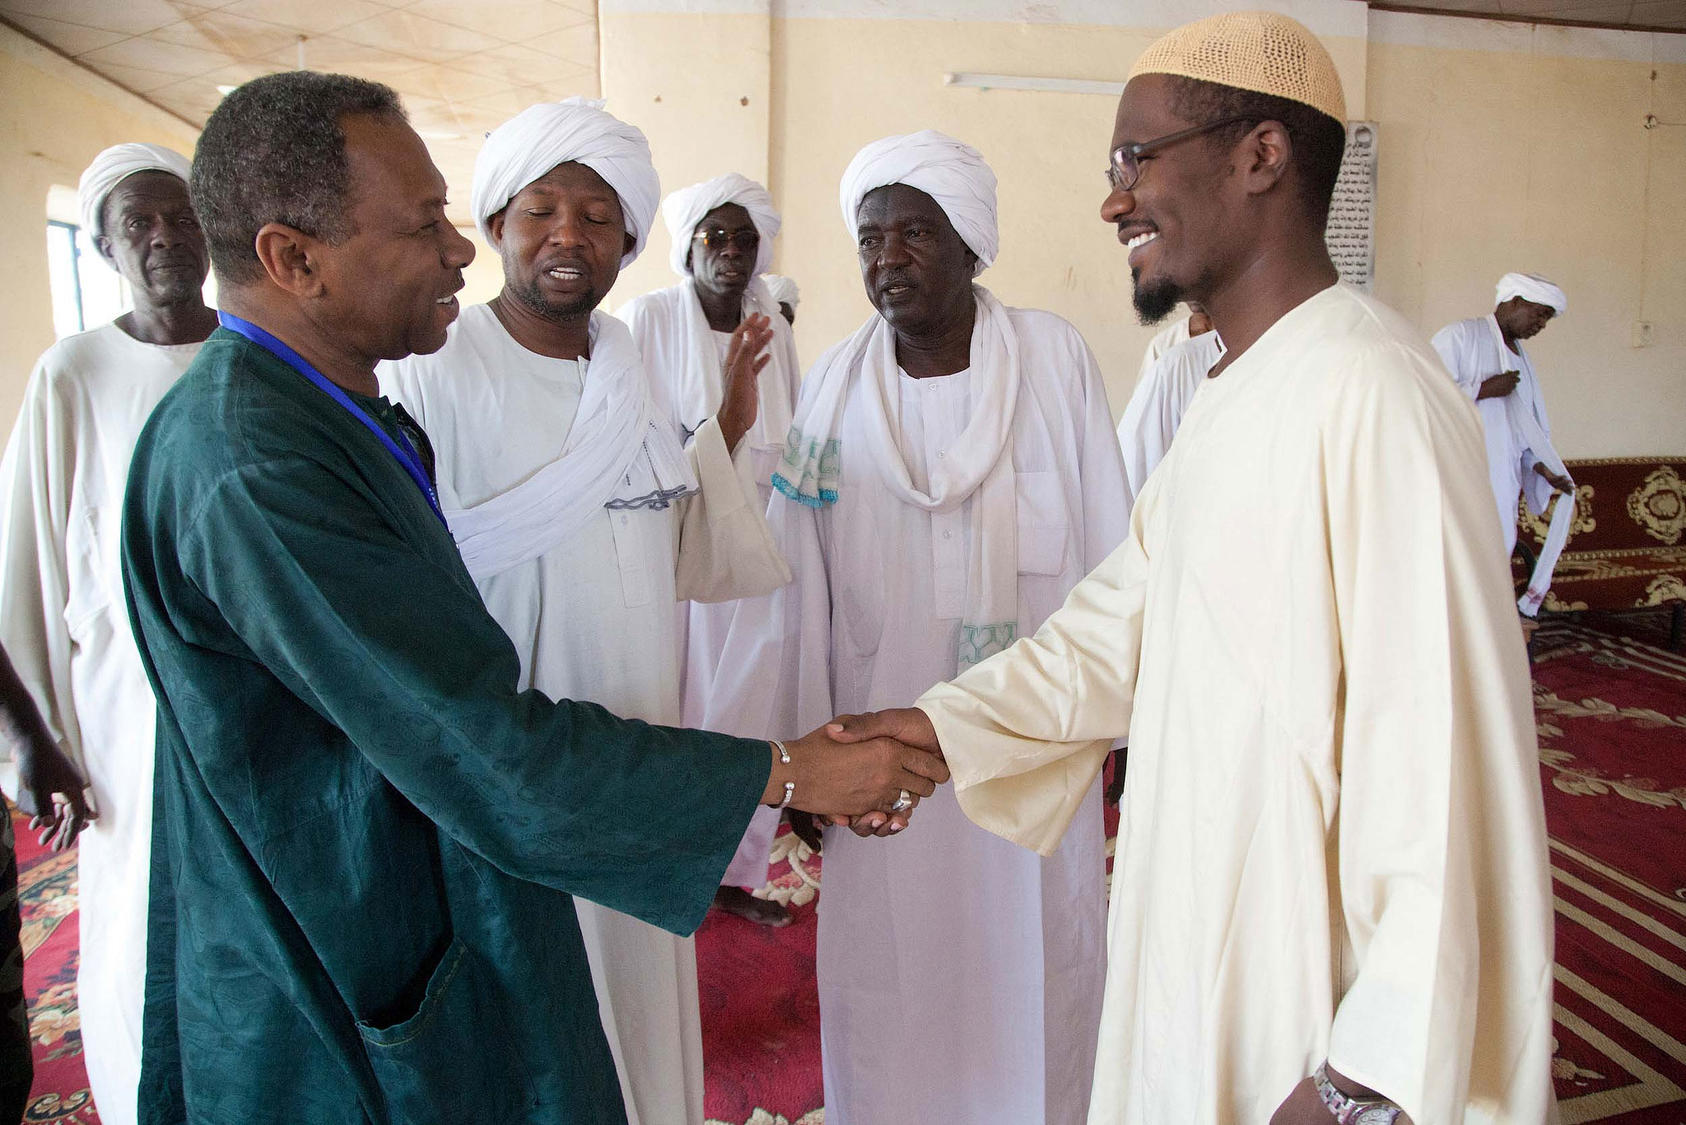 UNAMID Head of Office in Sector North, Hassan Gibril, salutes (right) king Yassir, the head of Al-Berti tribe, in his palace in Mellit, Norh Darfur. (Flickr/UNAMID)